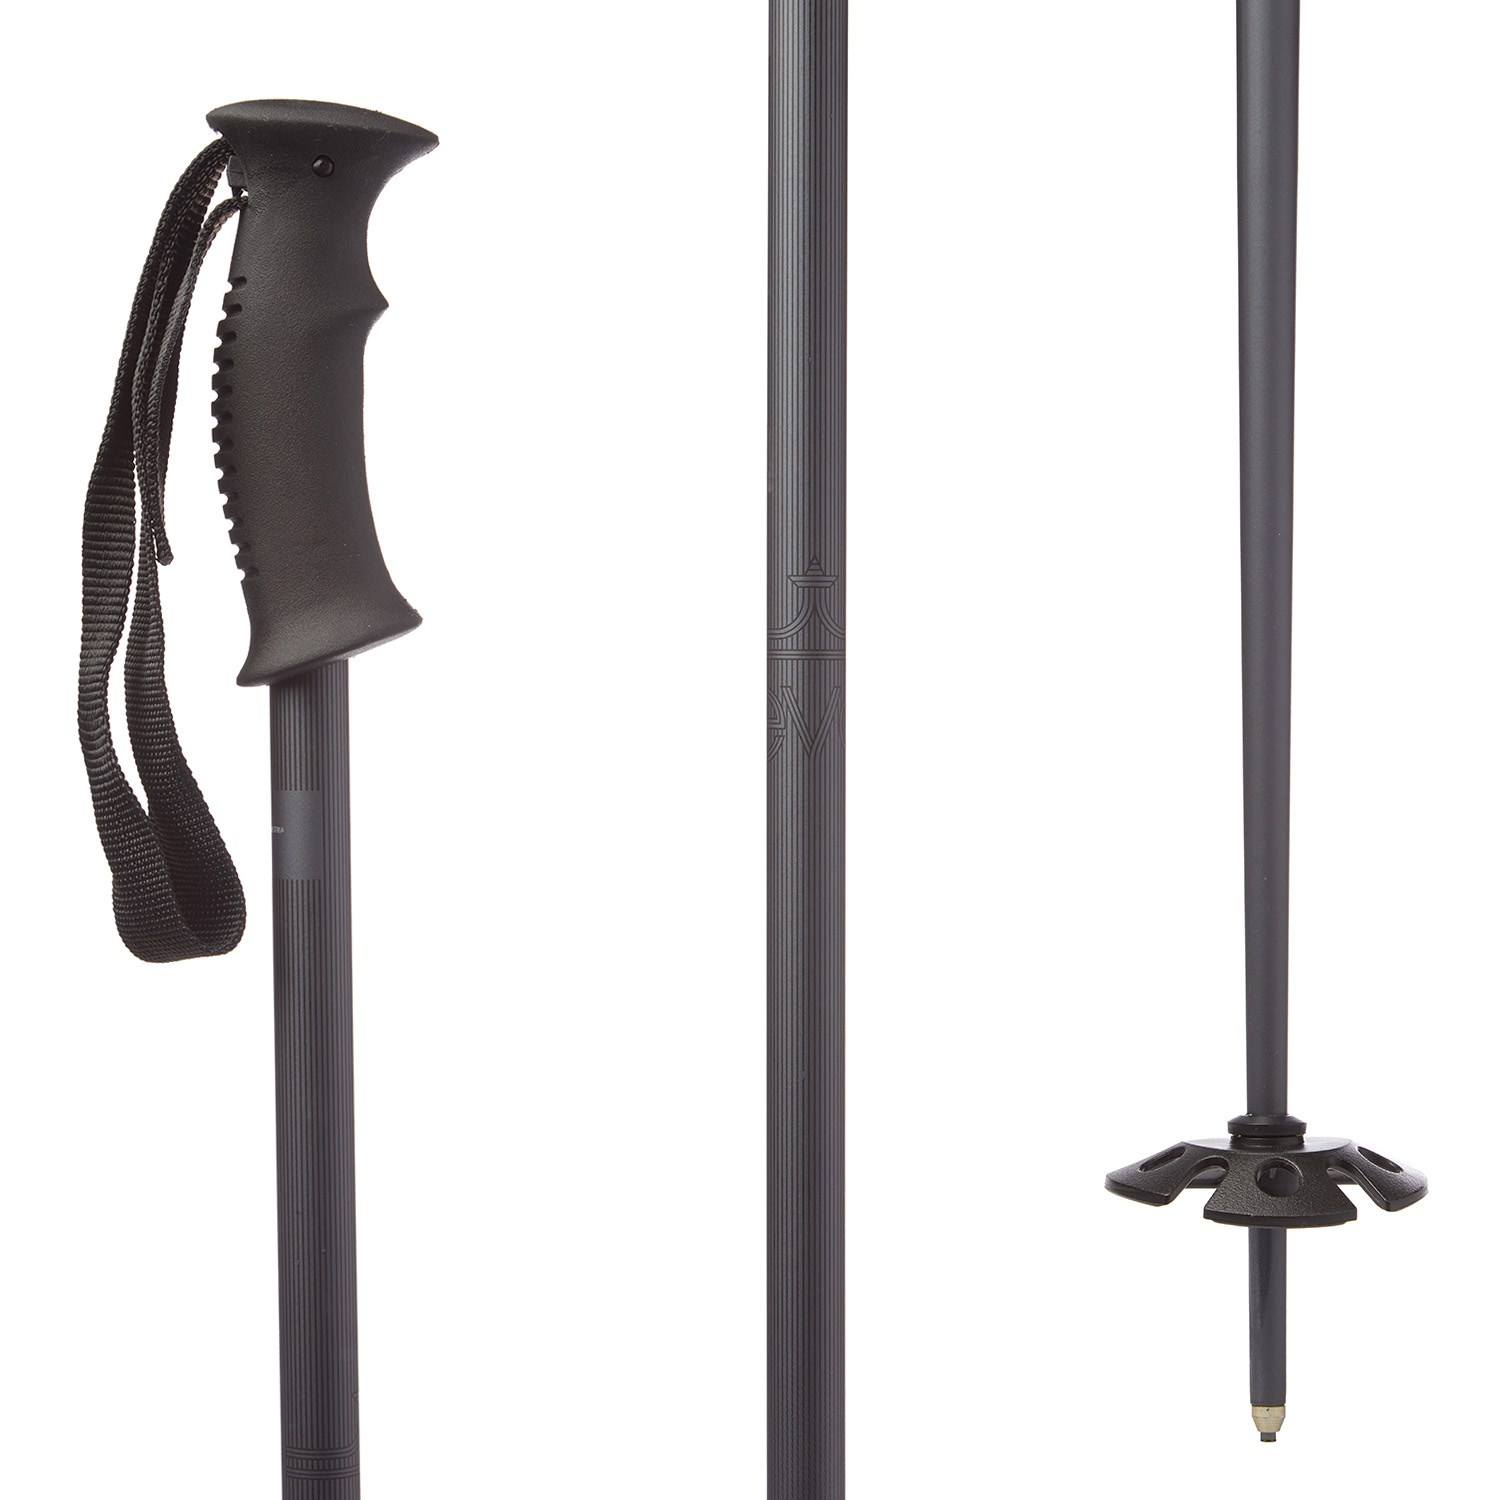 Advanced carbon fiber ski poles featuring lightweight, robust construction for improved agility and endurance in skiing, suitable for all skill levels